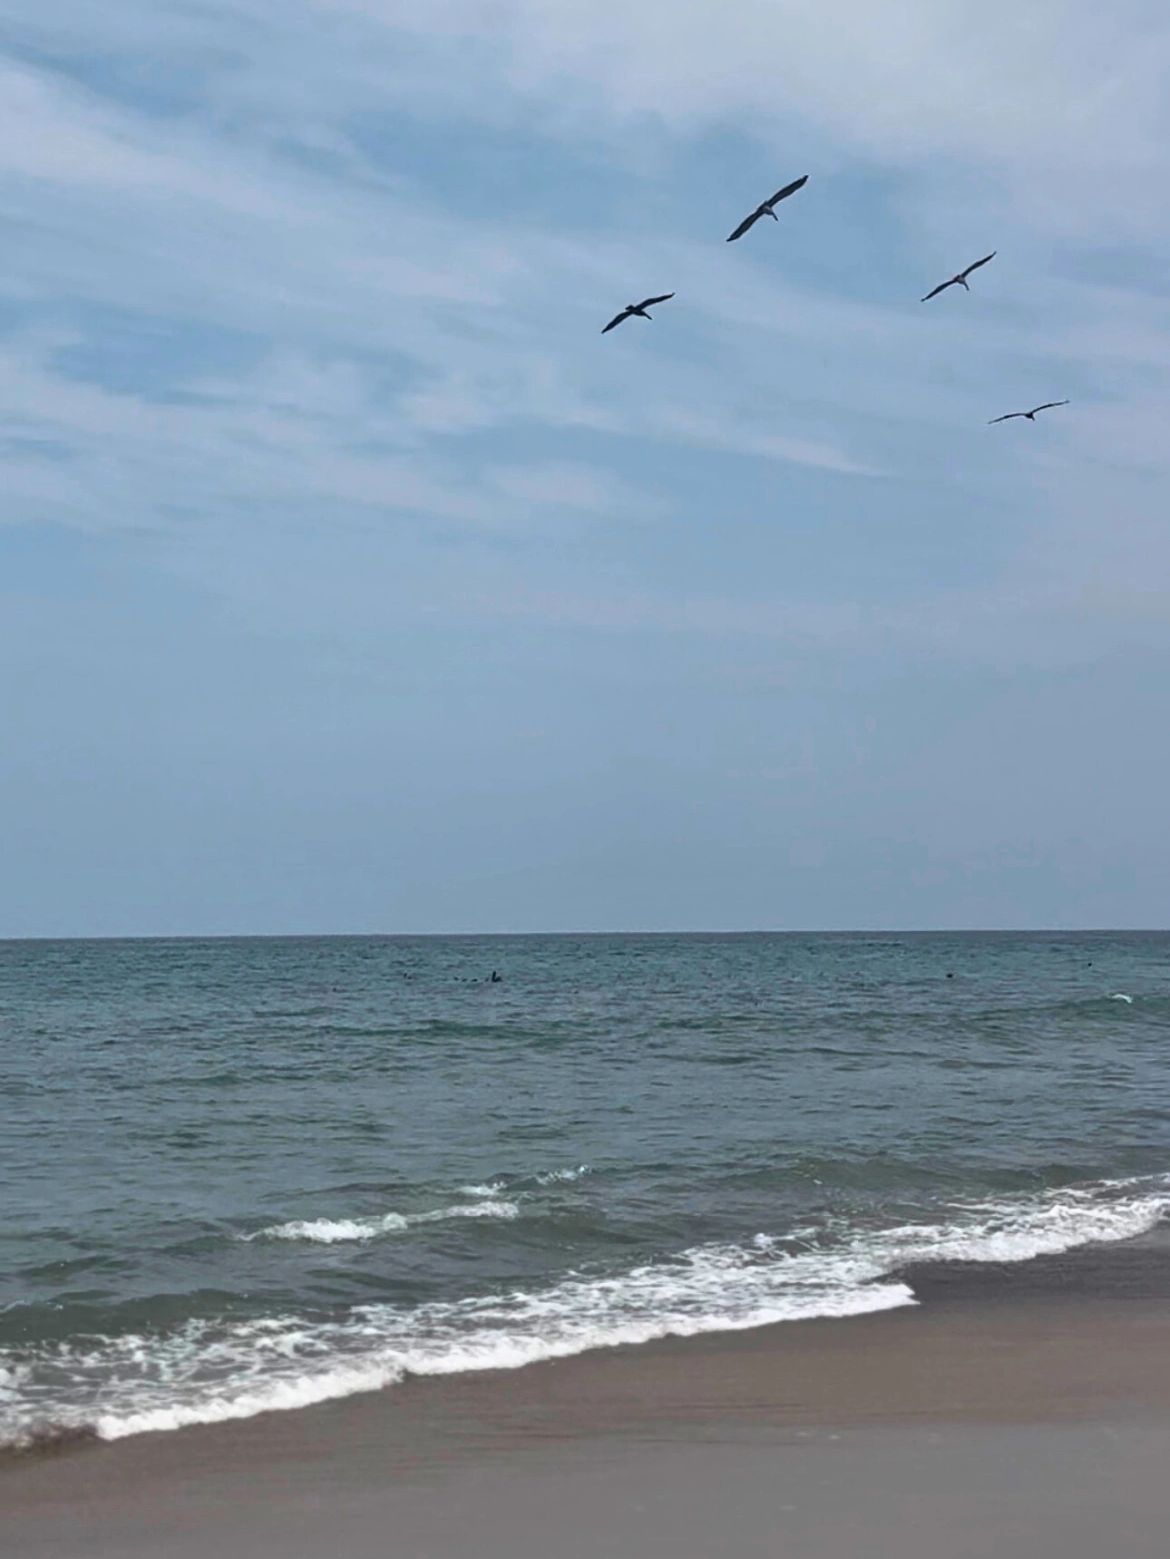 ocean with waves, sand and birds in the air